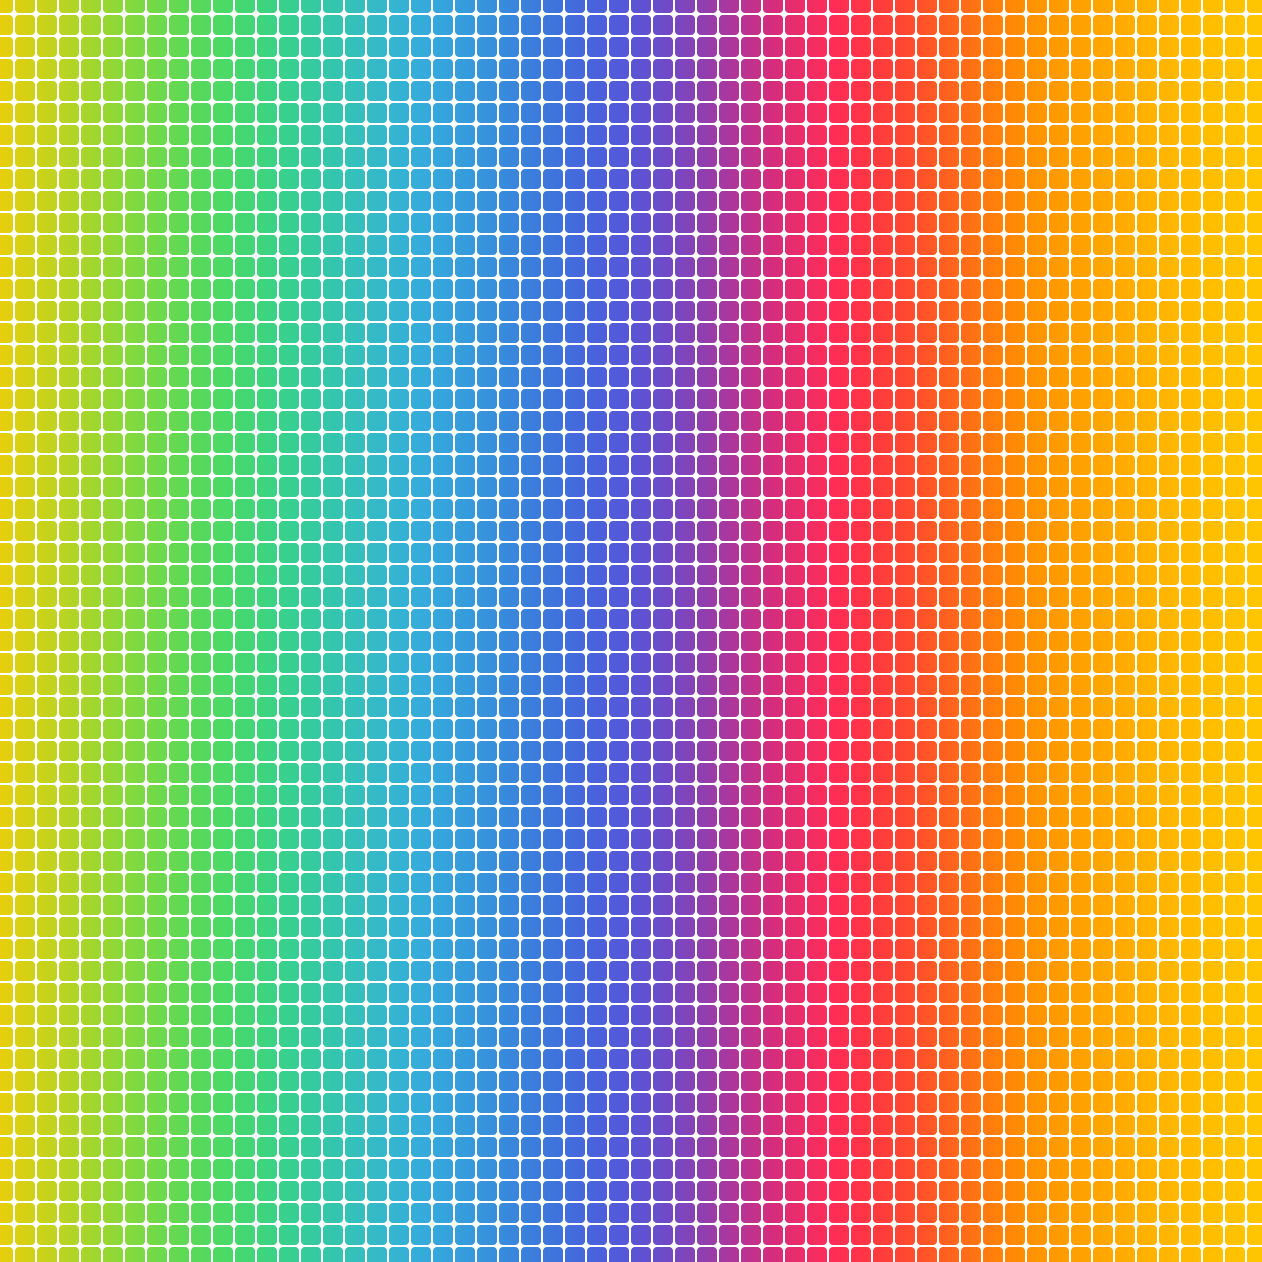 Get Hype For Wwdc 2014 With These Colorful Wallpapers - Whatsapp Wallpaper Color Full , HD Wallpaper & Backgrounds